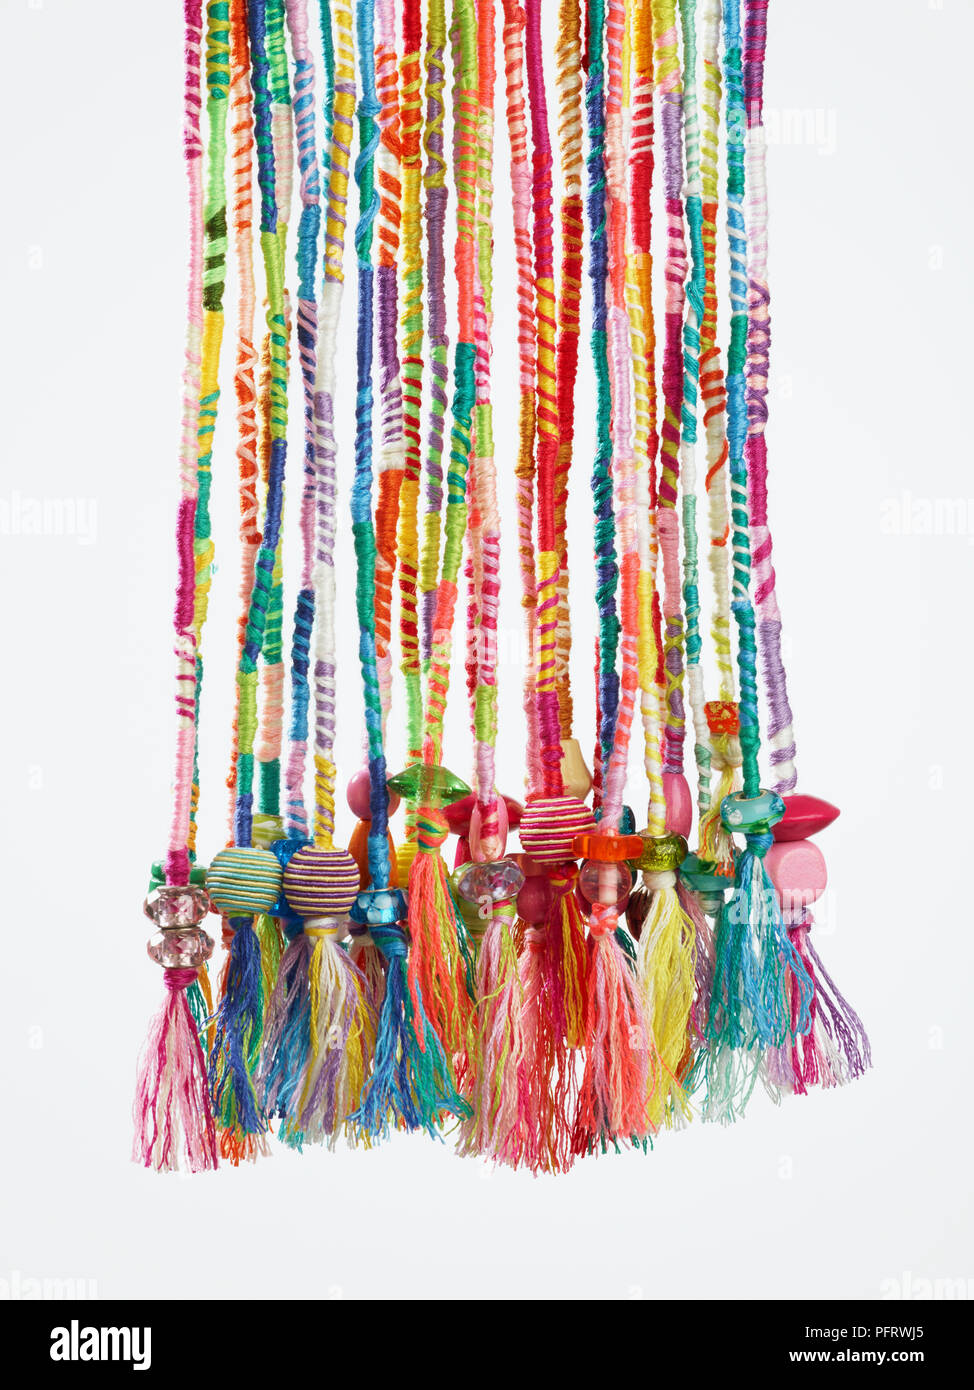 Collection of hair wraps Stock Photo